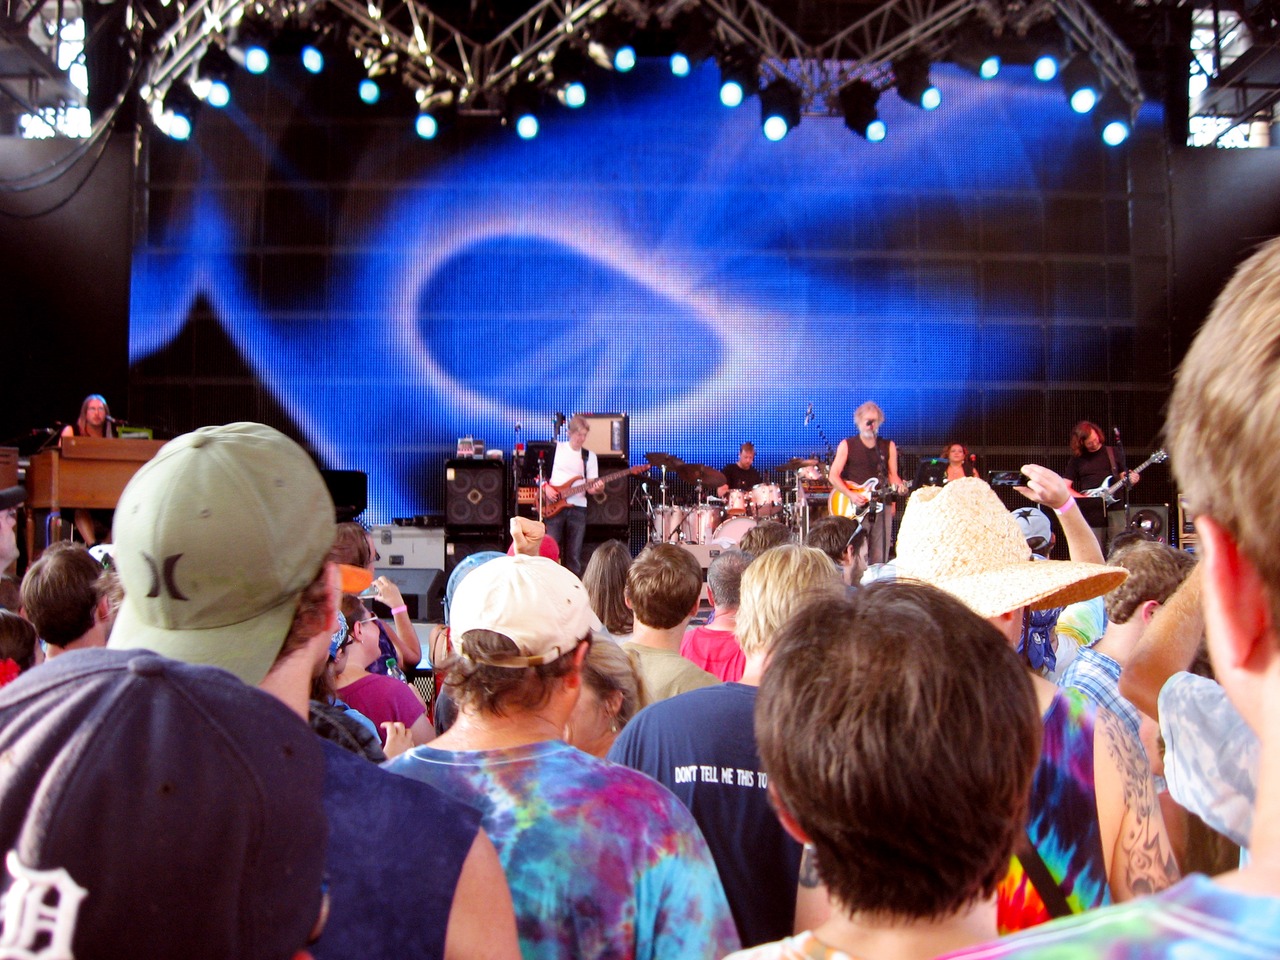 Furthur performing at the St. Augustine Amphitheatre during the first set.